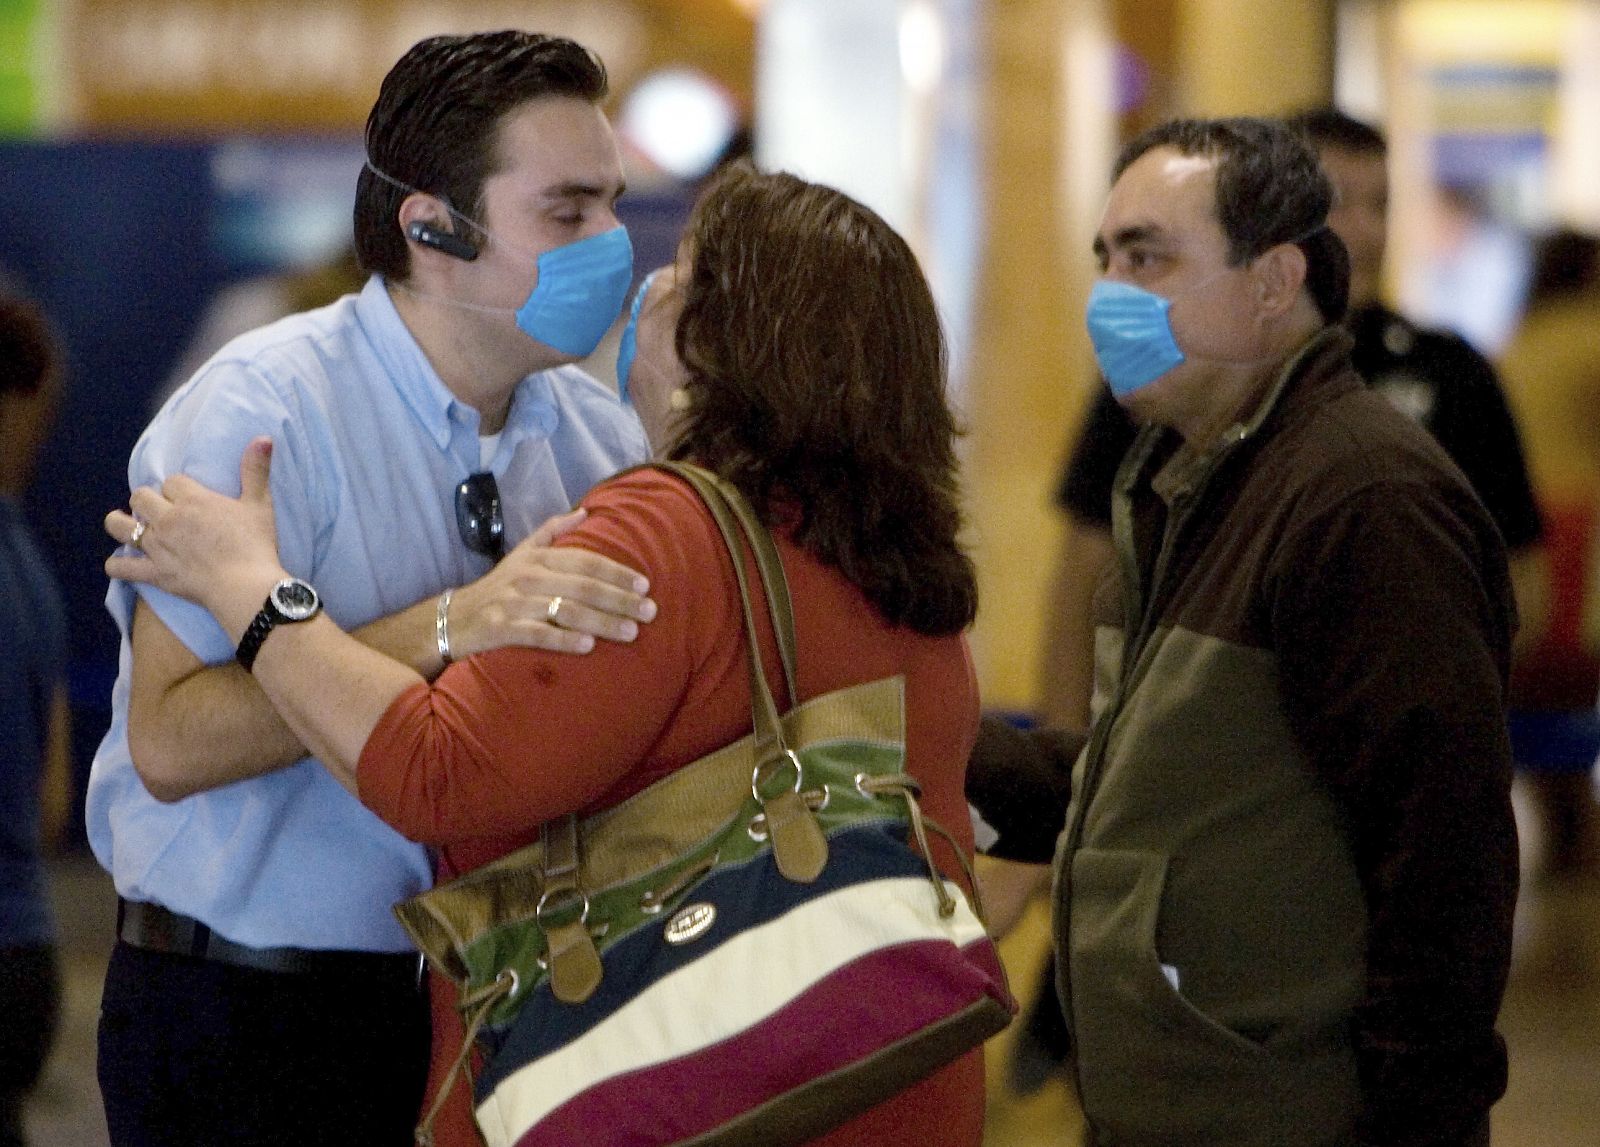 A couple wearing surgical masks kiss each other goodbye as the woman is about to board a plane at the international airport in Cancun, Mexico